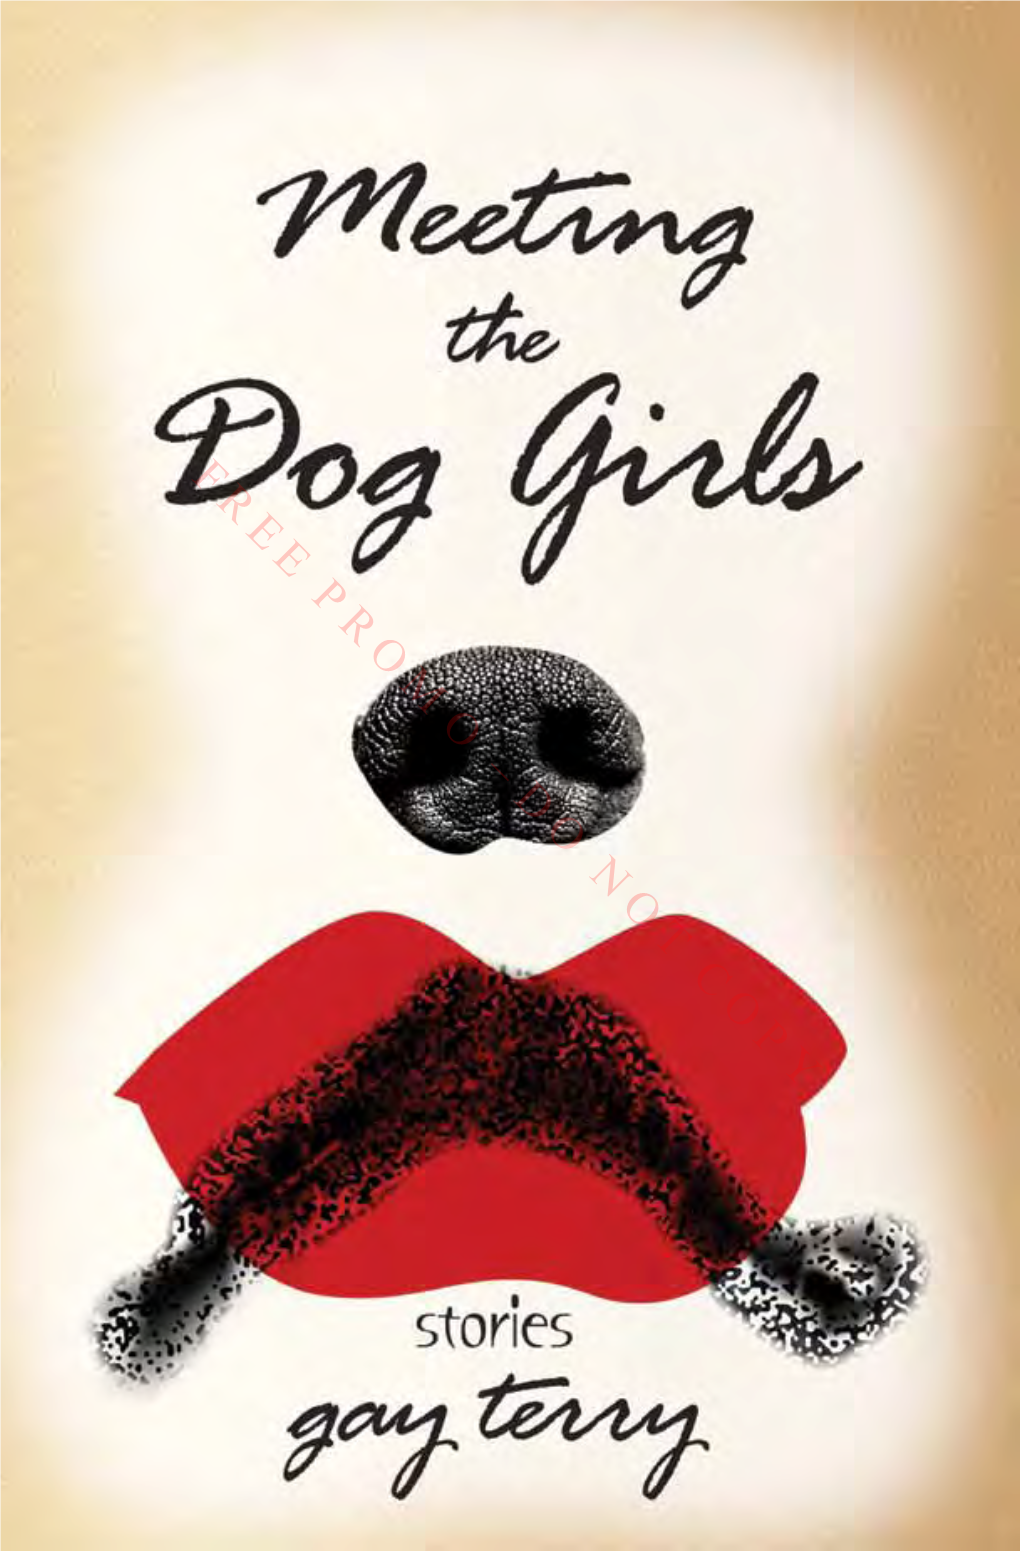 MEETING the DOG GIRLS Stories